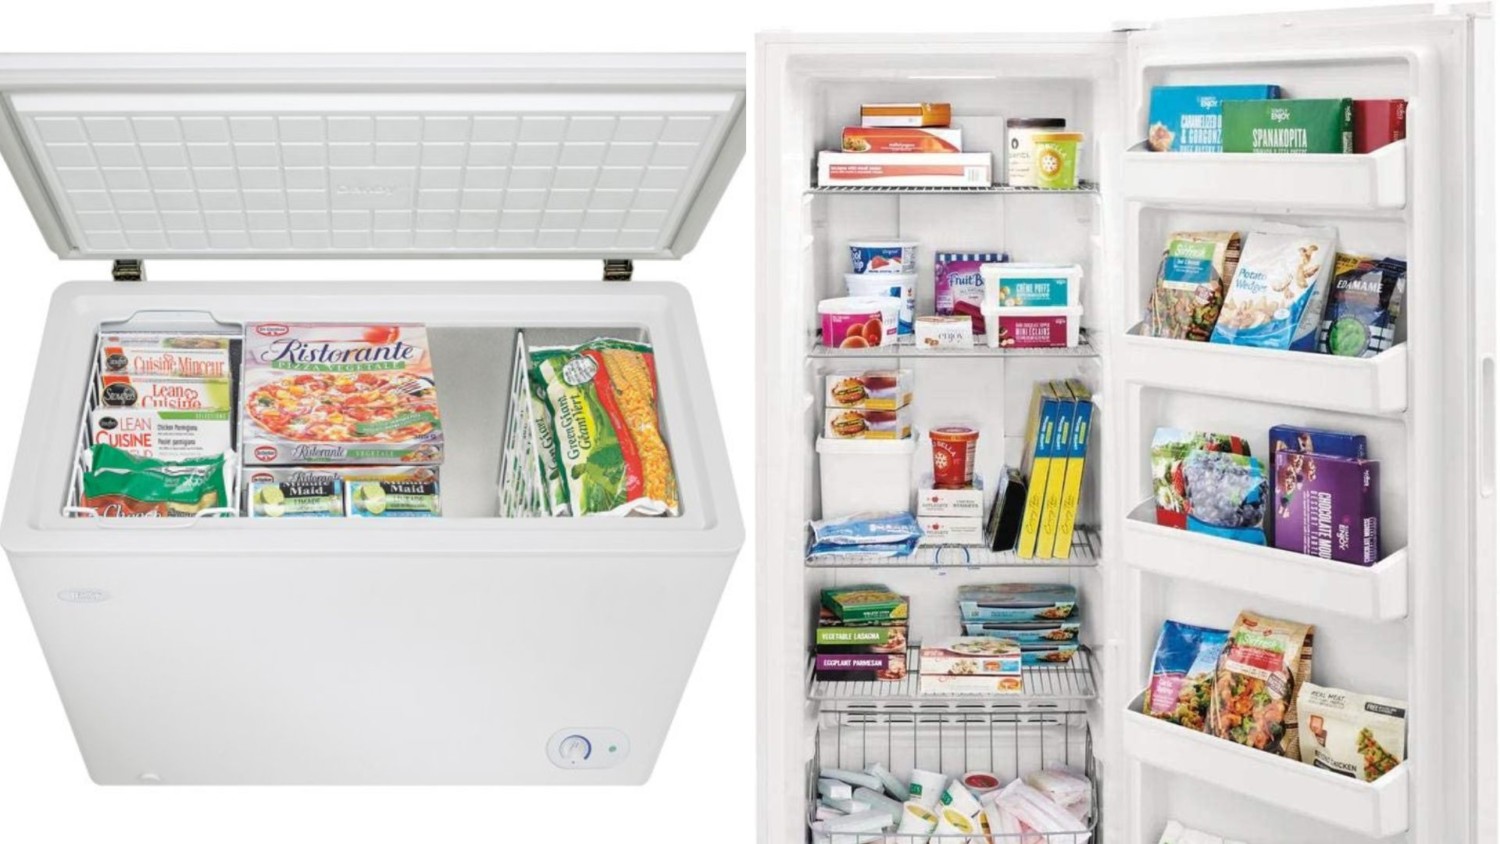 These freezers are perfect for extra storage in your garage or basement